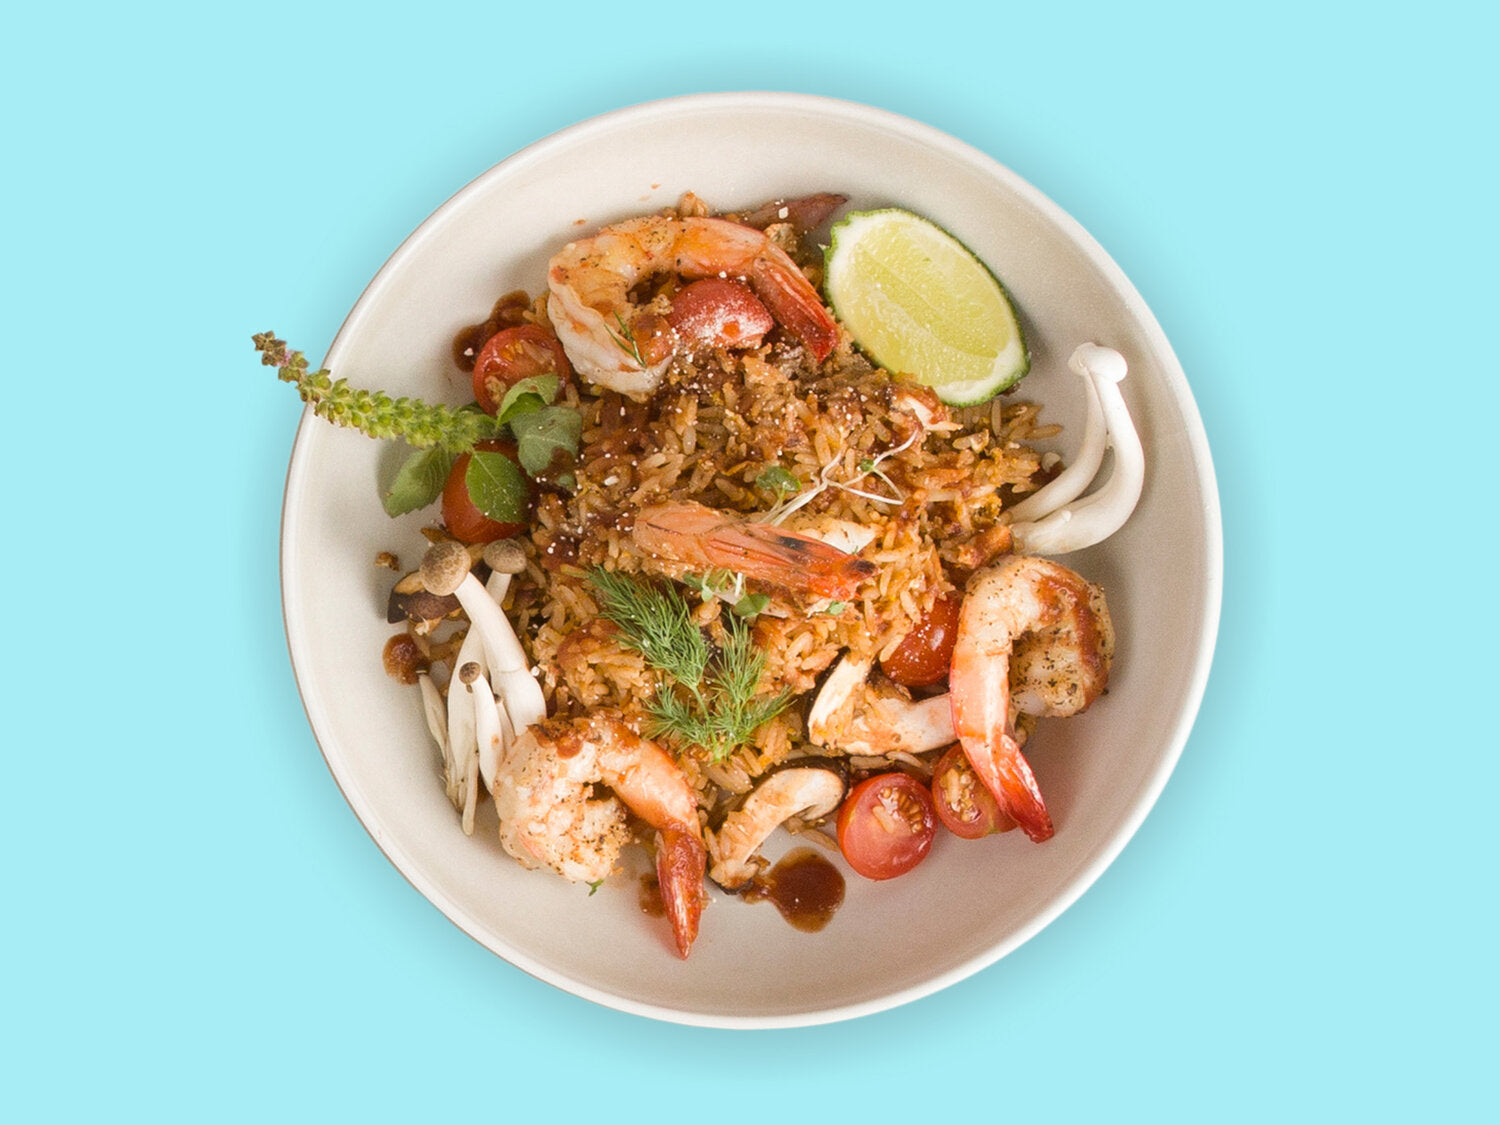 A white plate of shrimp with rice and vegetables in it on blue background can be seen.